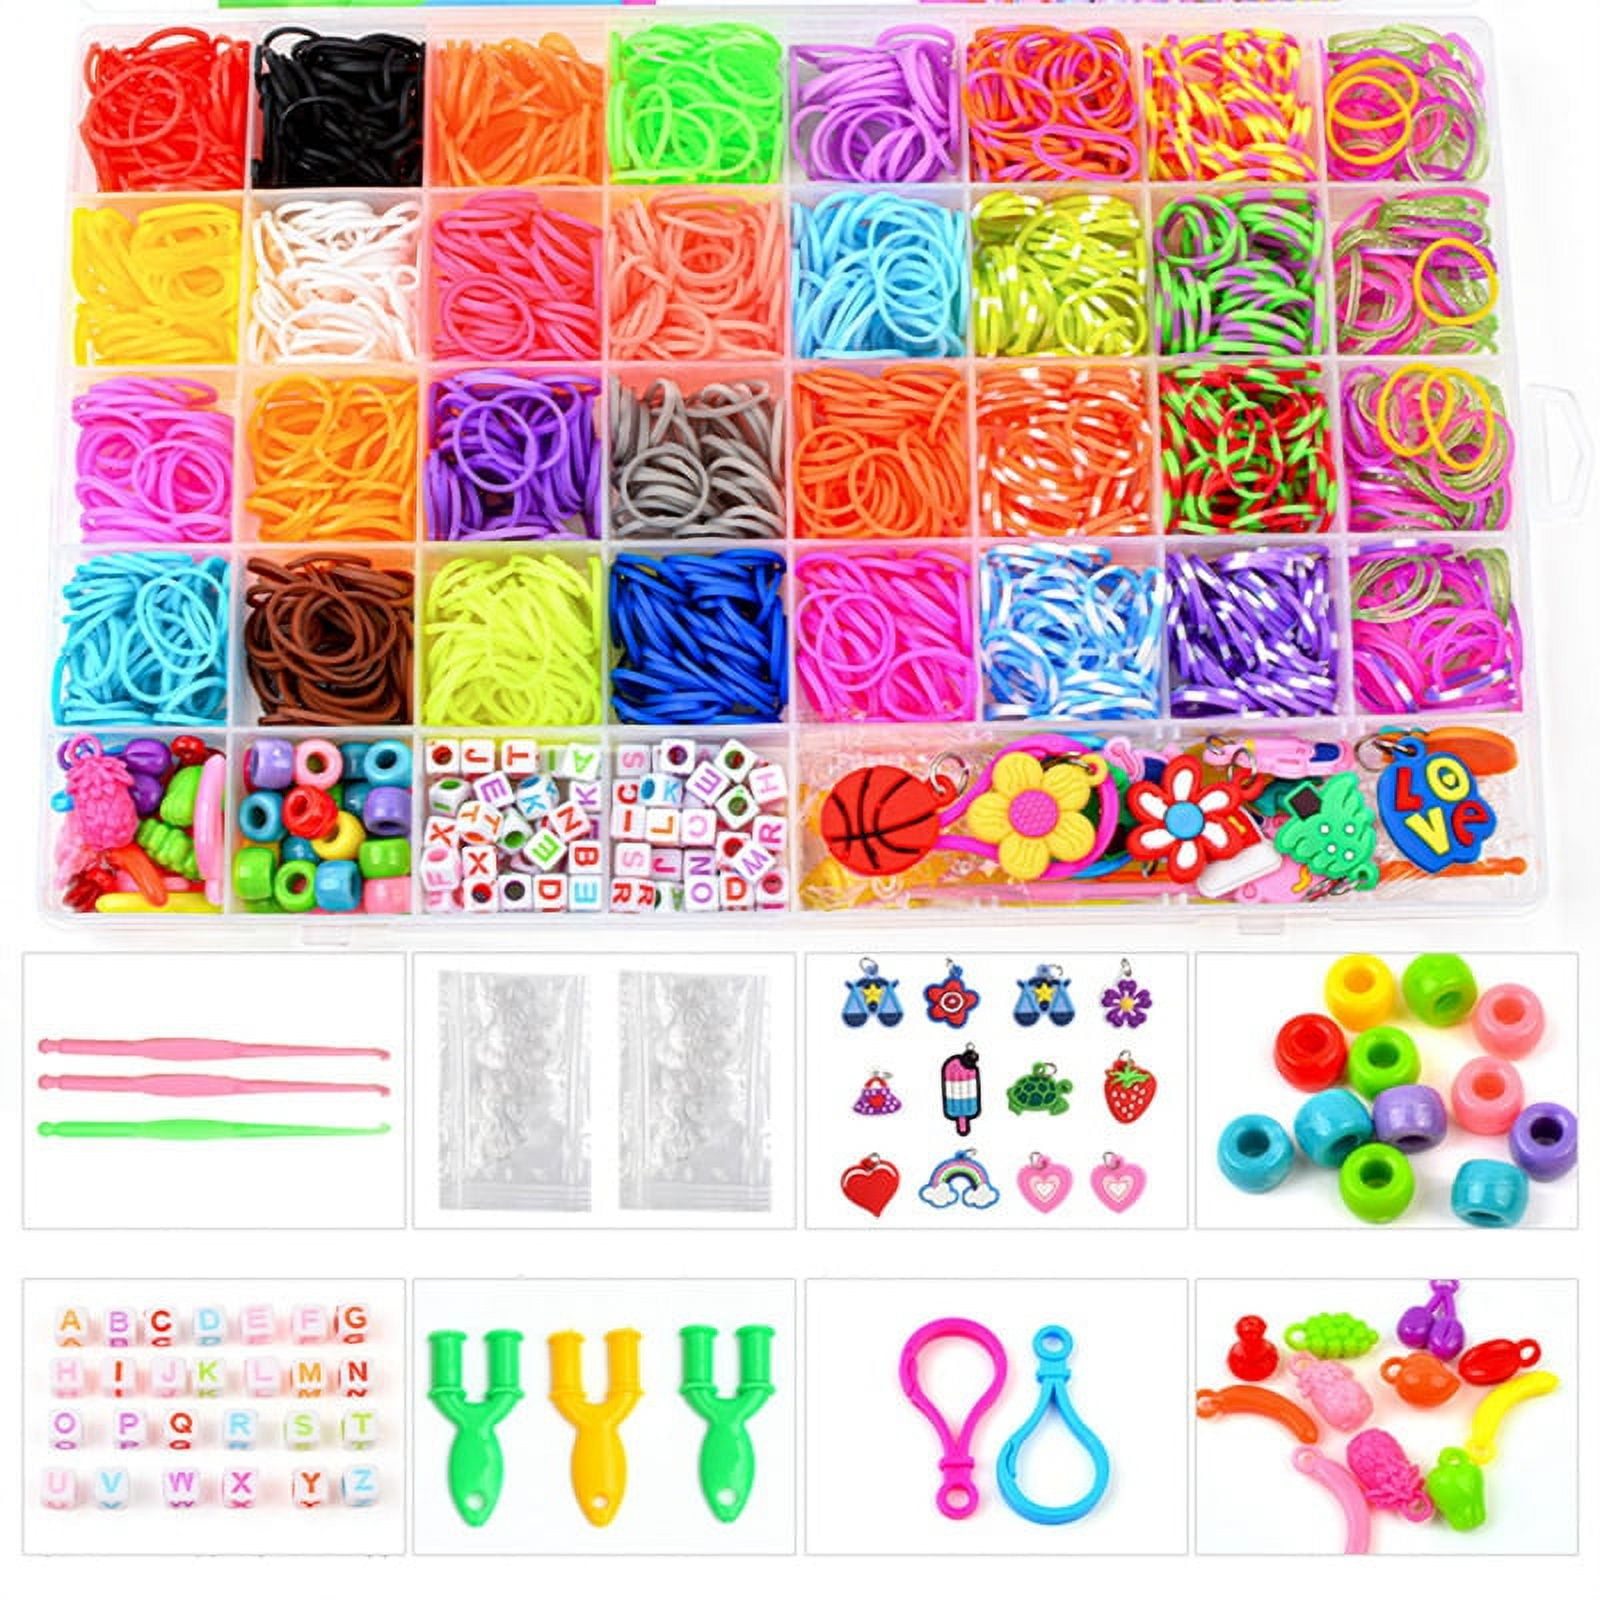 Colorful Loom Bands Set 600/Candy Color Greek Bracelets Making Kit For DIY Rubber  Band Woven Girls Craft Toys Gifts 220608 From Yujia08, $10.16